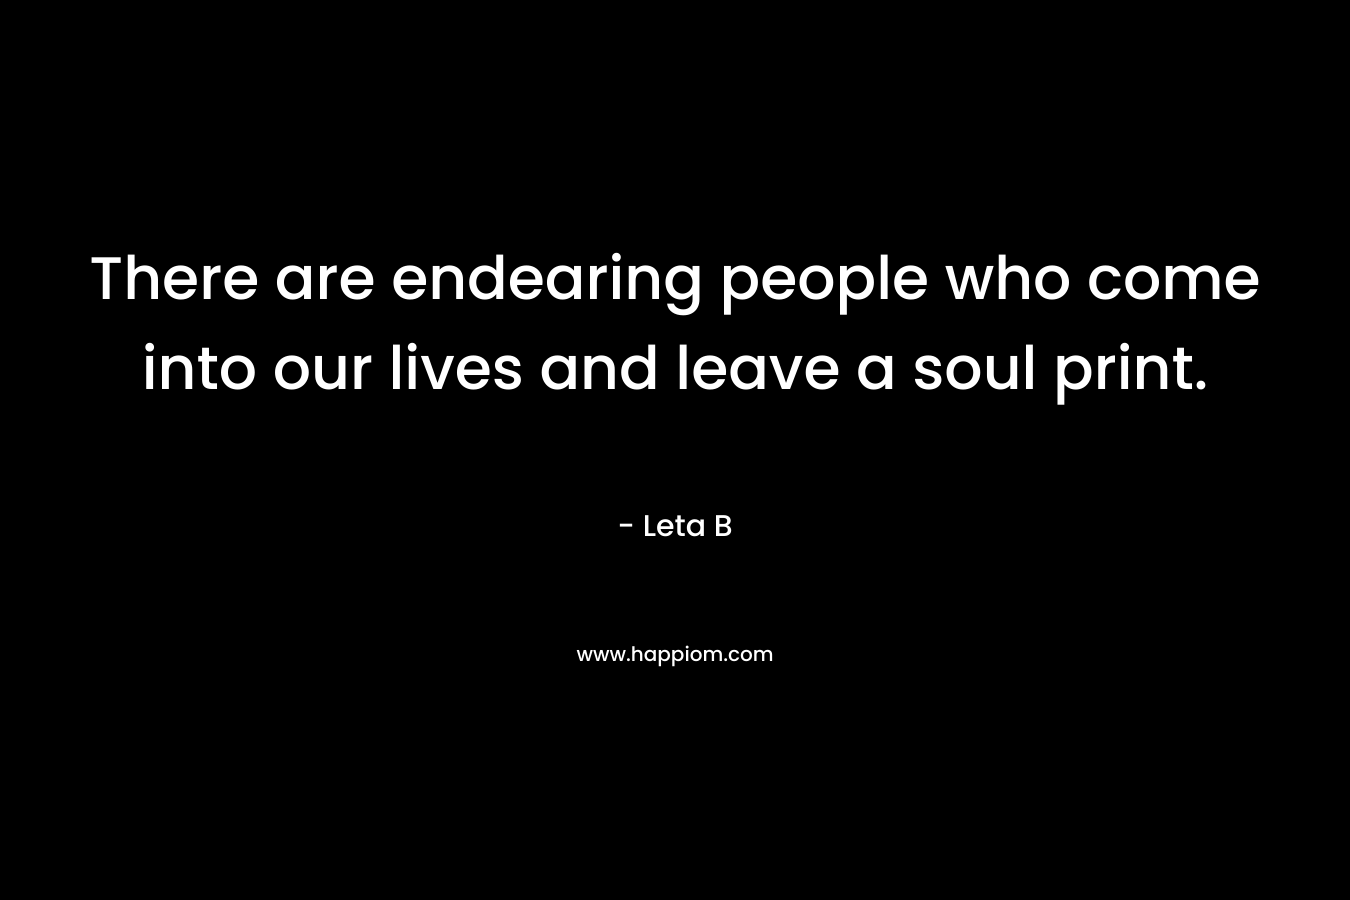 There are endearing people who come into our lives and leave a soul print. – Leta B